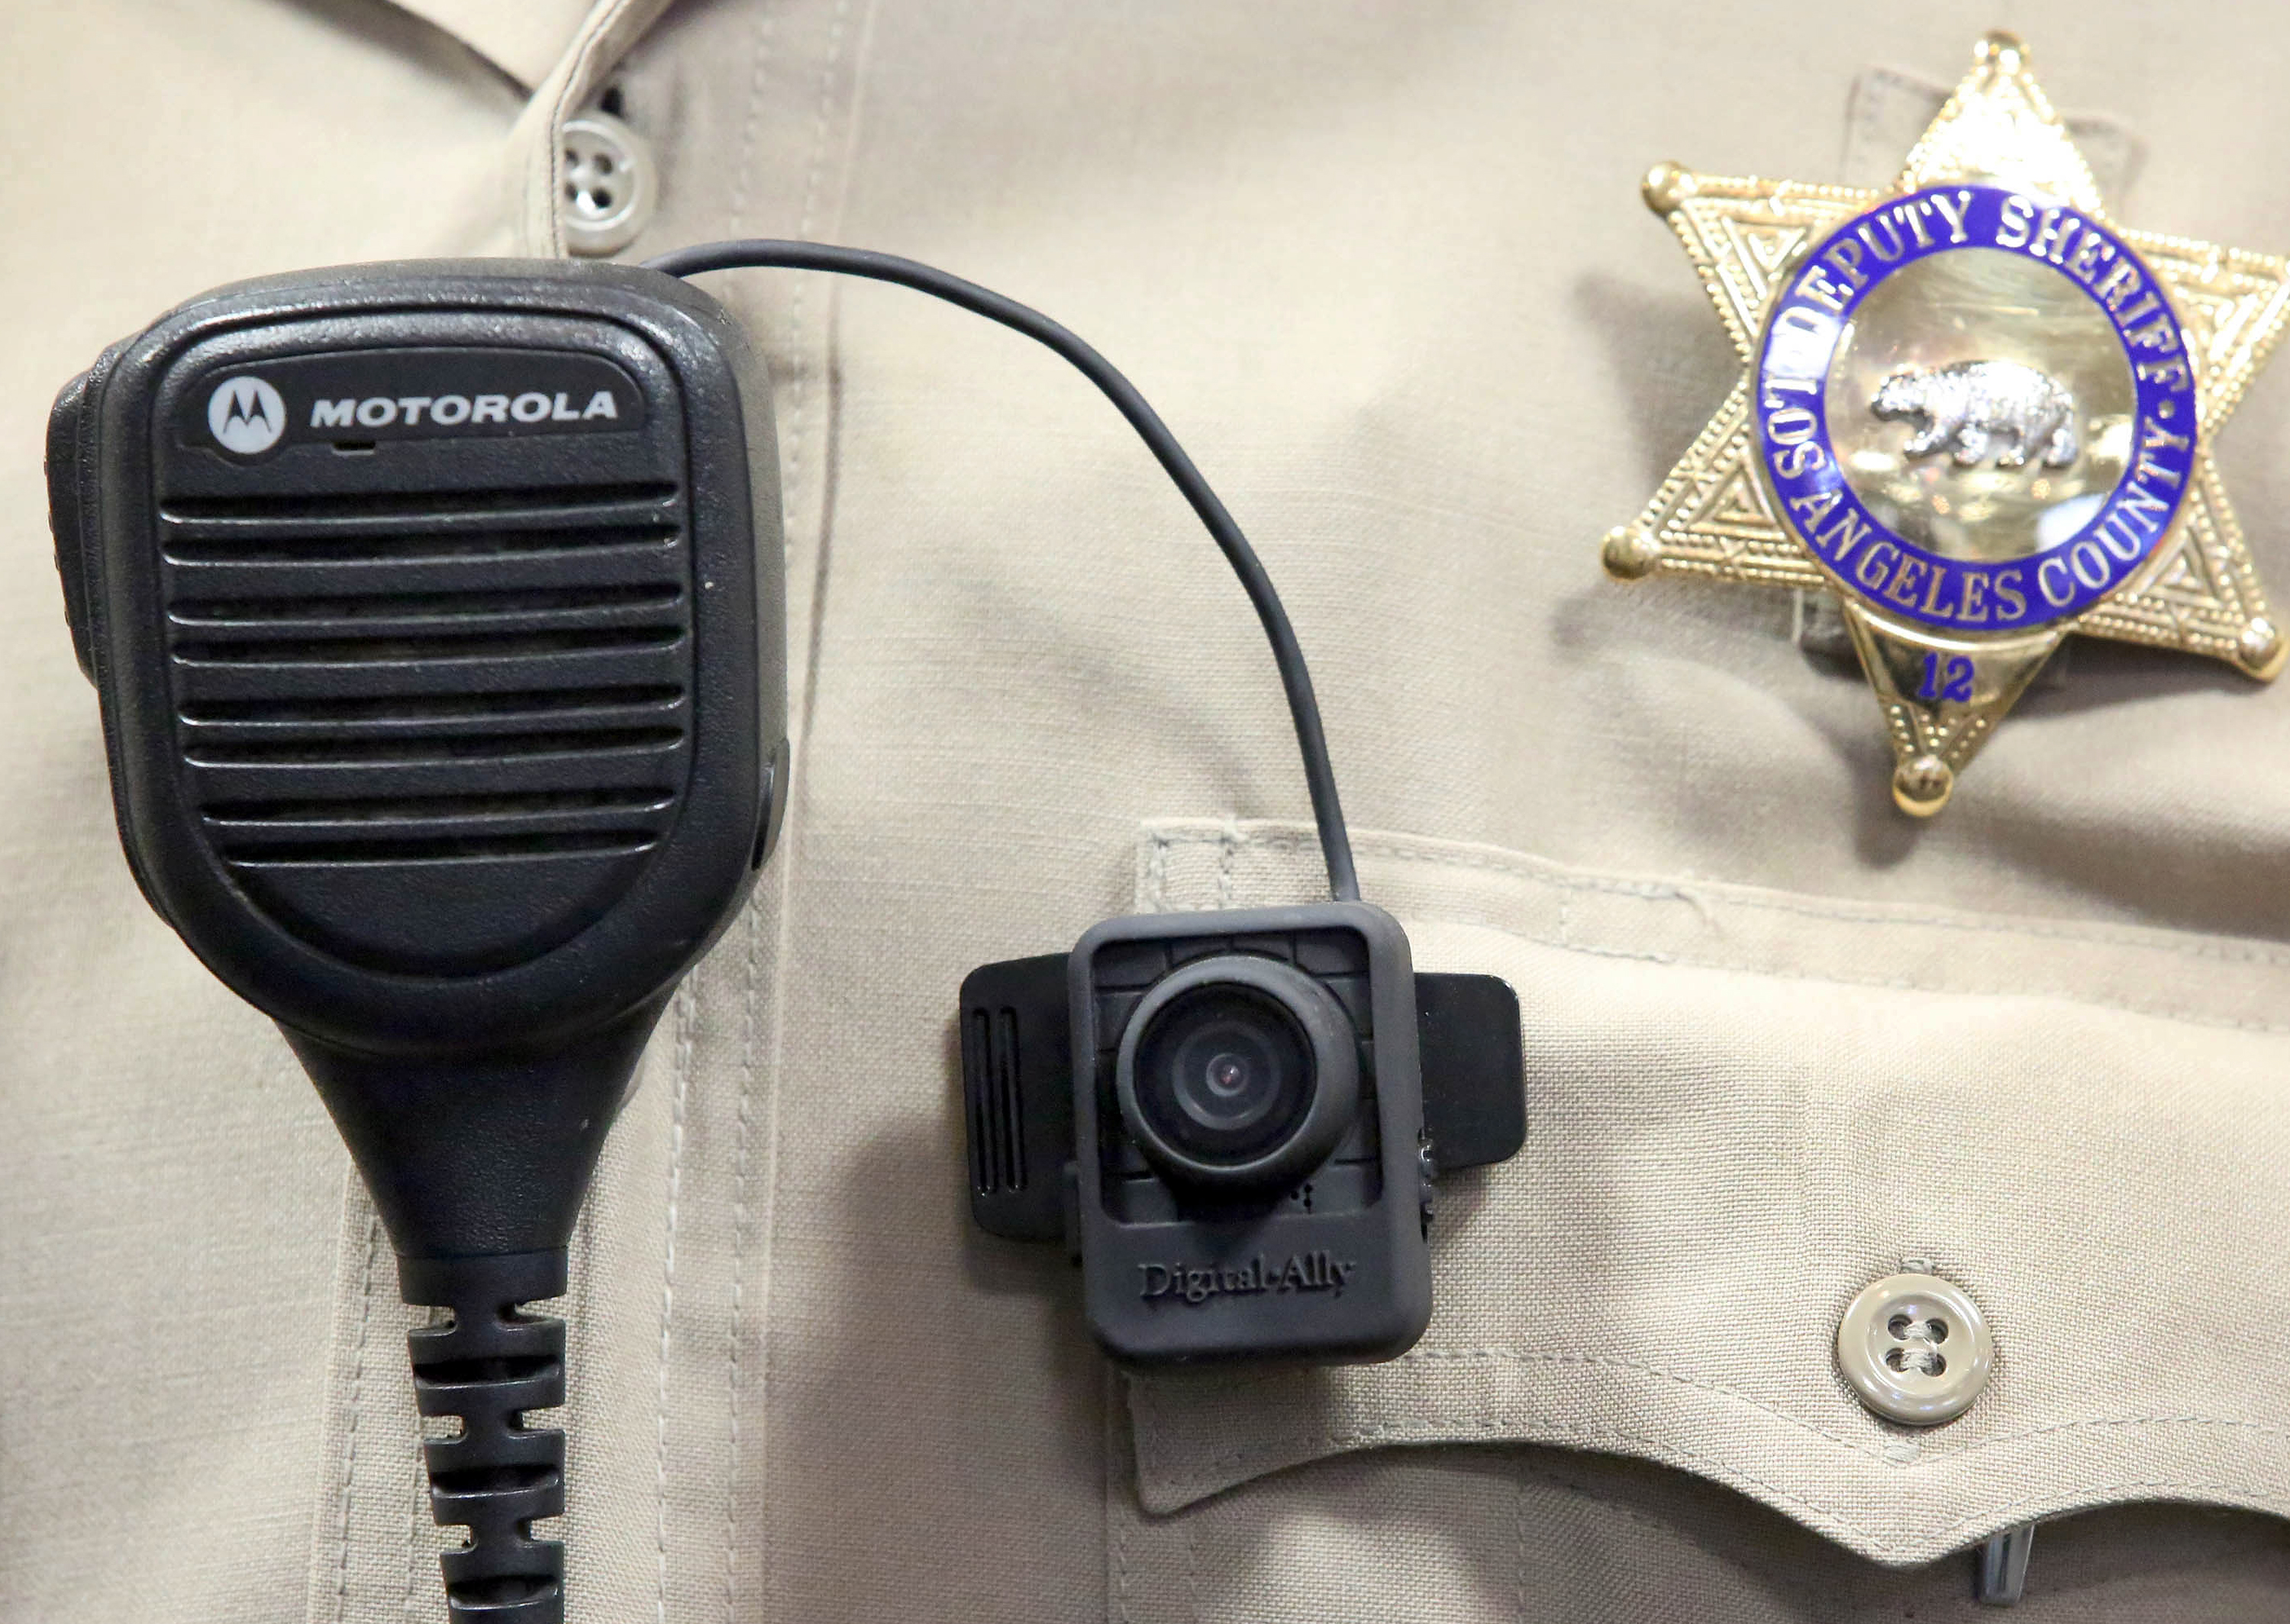 A body camera is displayed at a news conference at the Sheriff's Headquarters in the Monterey Park section of Los Angeles on Sept. 22, 2014. (Nick Ut—AP)